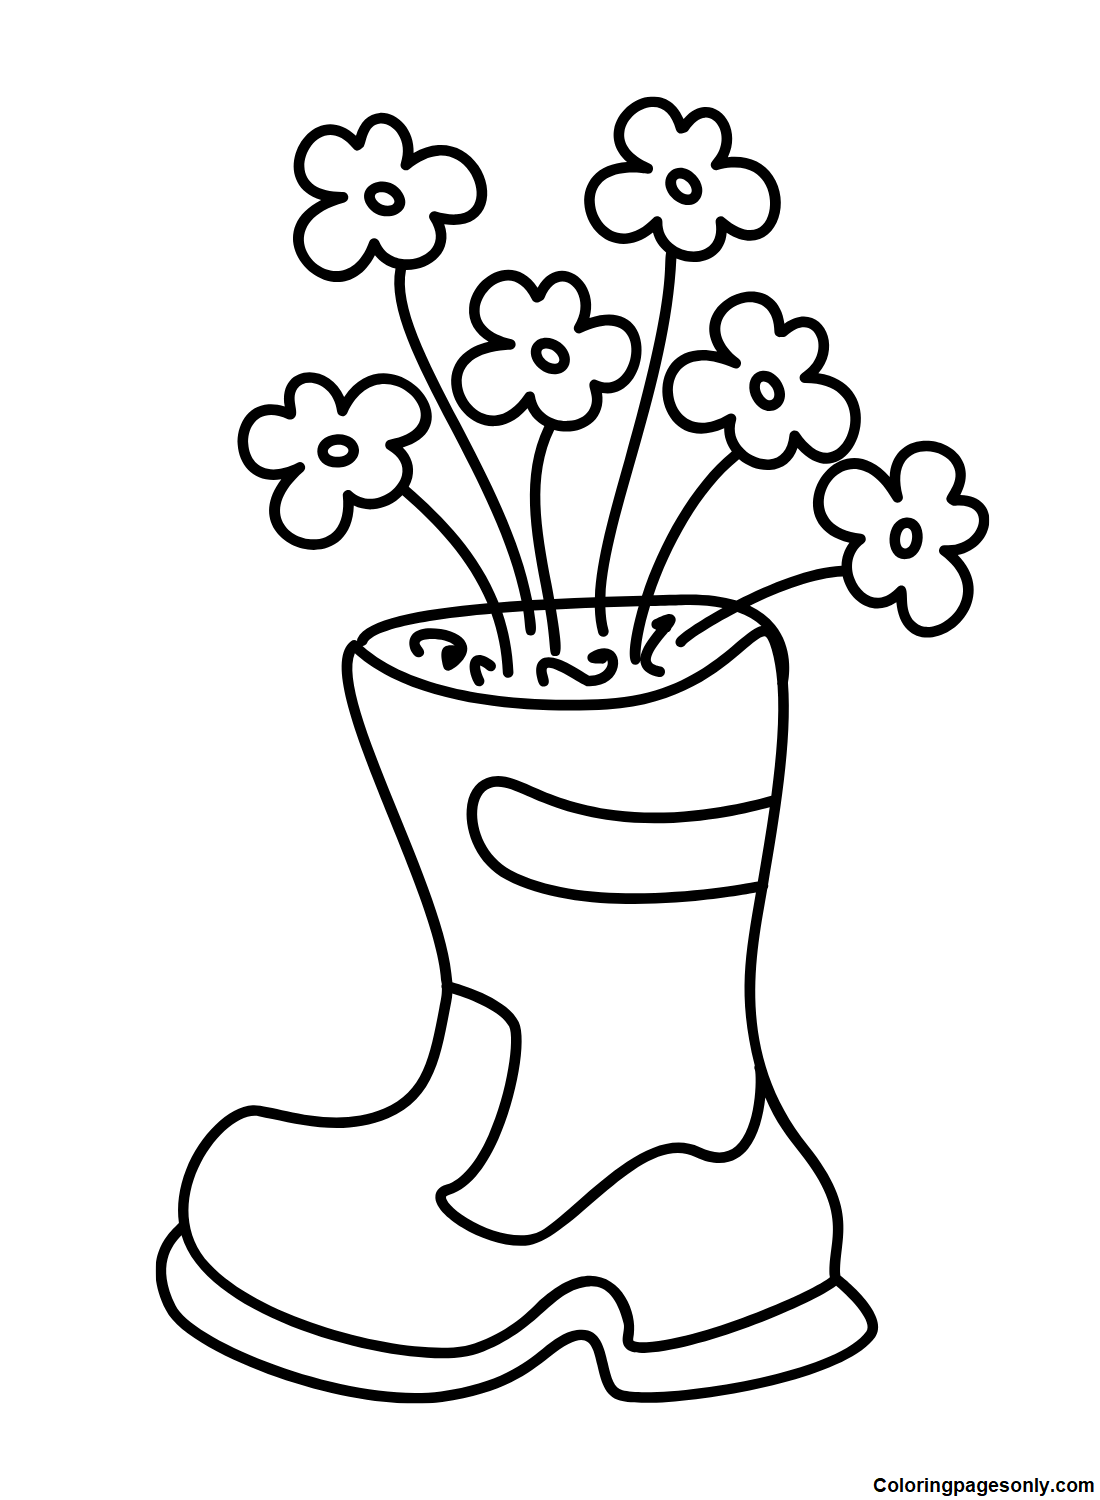 Boots with Spring Flowers Coloring Page